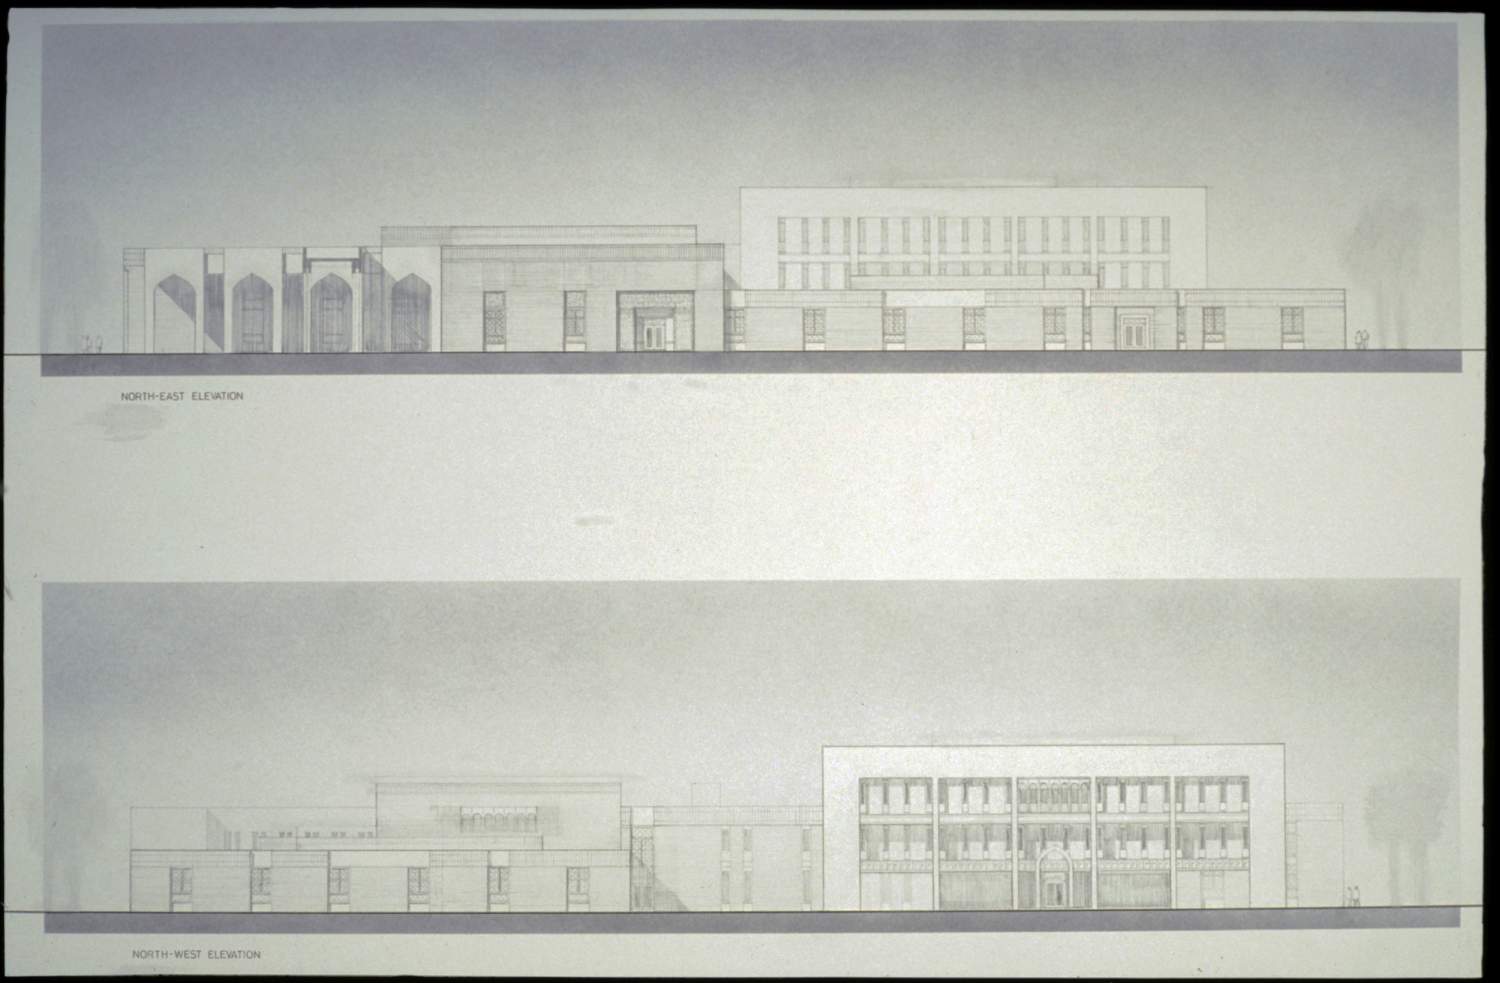 Central administration building: northeast and northwest elevations.